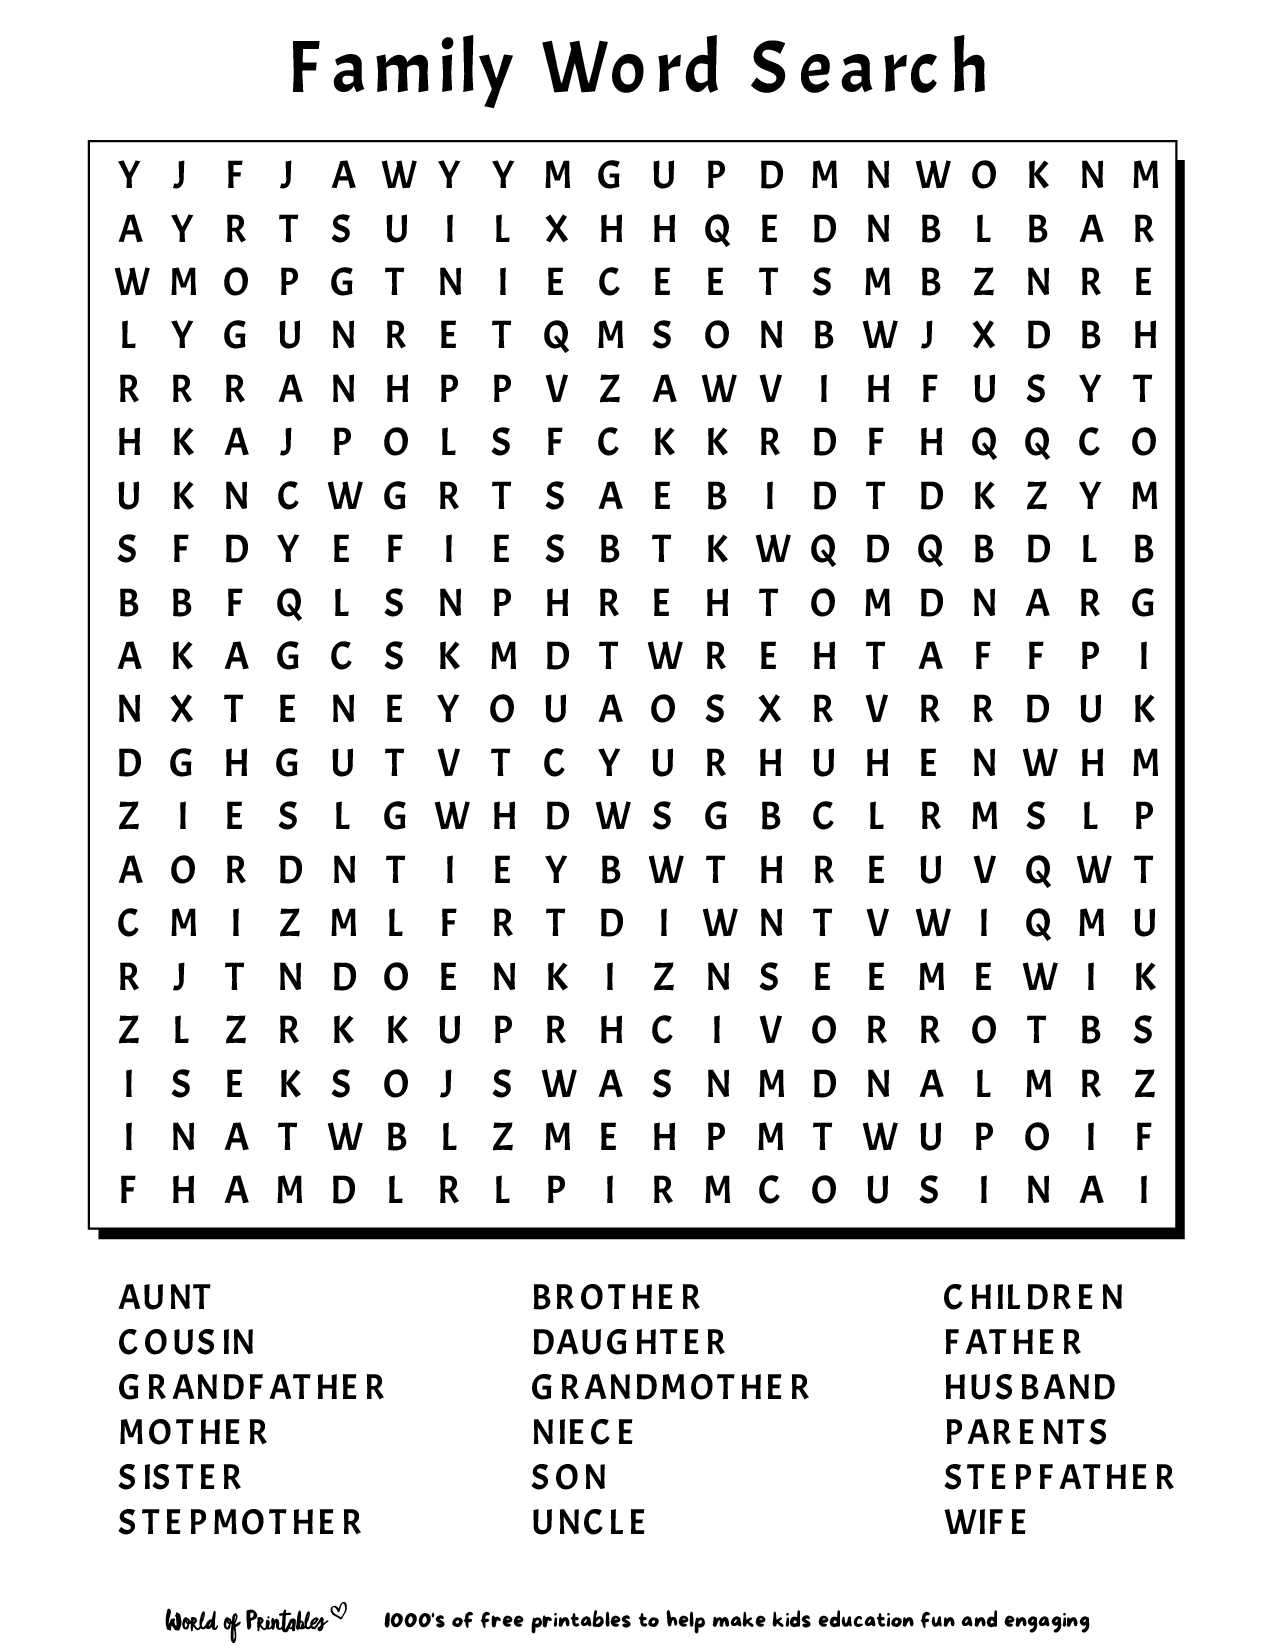 search-a-page-for-a-word-word-search-printable